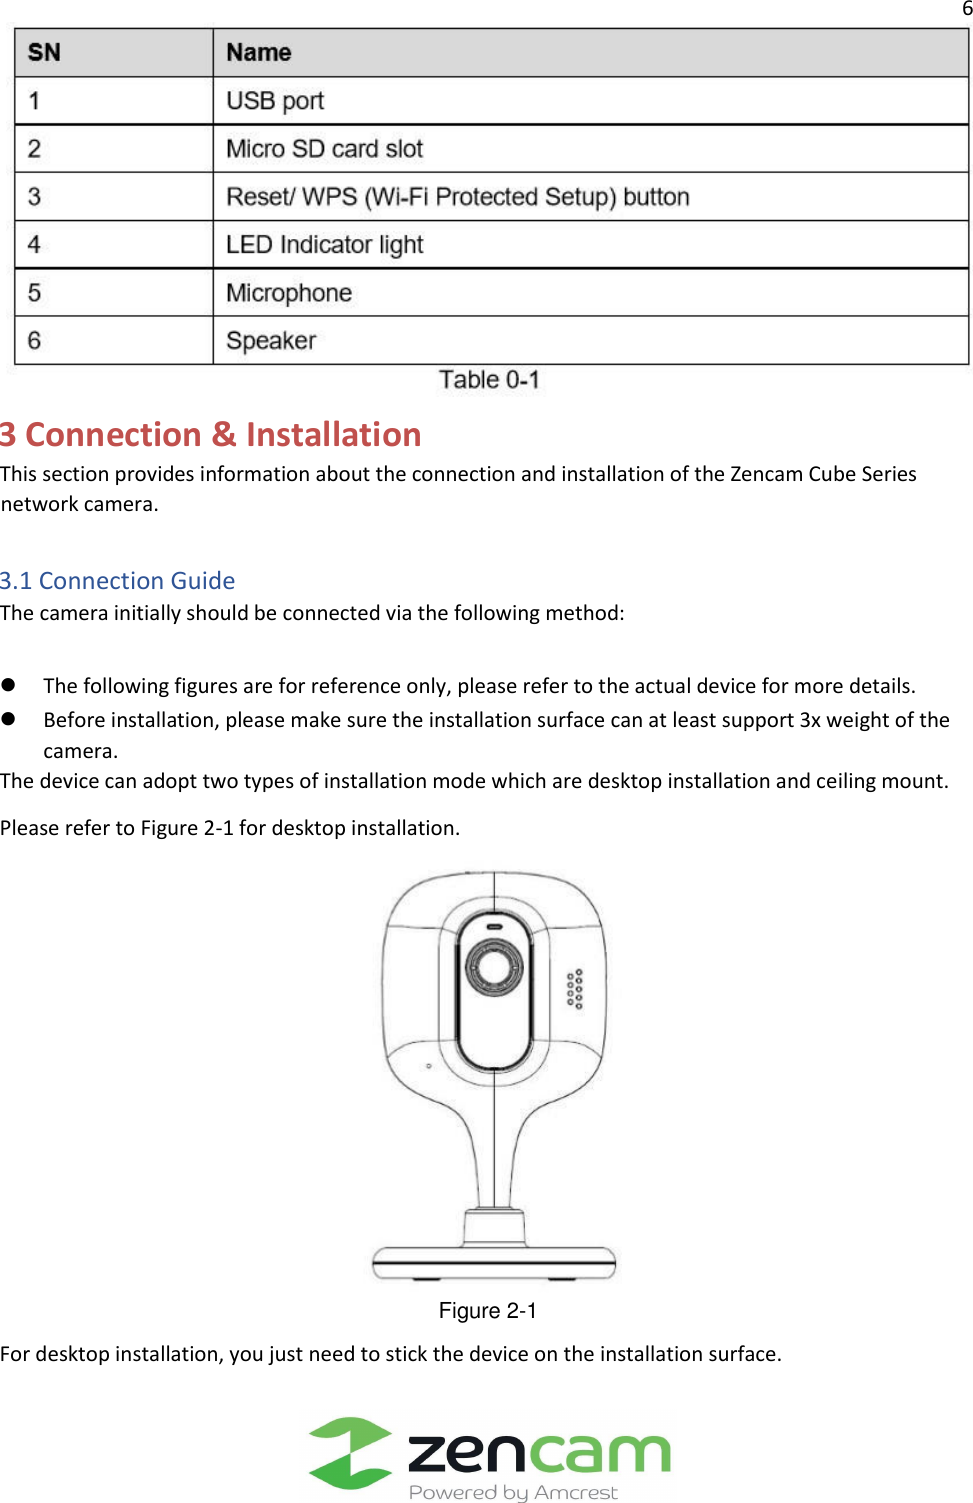                  6                                                                                                                  3 Connection &amp; Installation    This section provides information about the connection and installation of the Zencam Cube Series network camera.    3.1 Connection Guide    The camera initially should be connected via the following method:    ⚫ The following figures are for reference only, please refer to the actual device for more details.   ⚫ Before installation, please make sure the installation surface can at least support 3x weight of the camera.    The device can adopt two types of installation mode which are desktop installation and ceiling mount.    Please refer to Figure 2-1 for desktop installation.                                      Figure 2-1   For desktop installation, you just need to stick the device on the installation surface.   